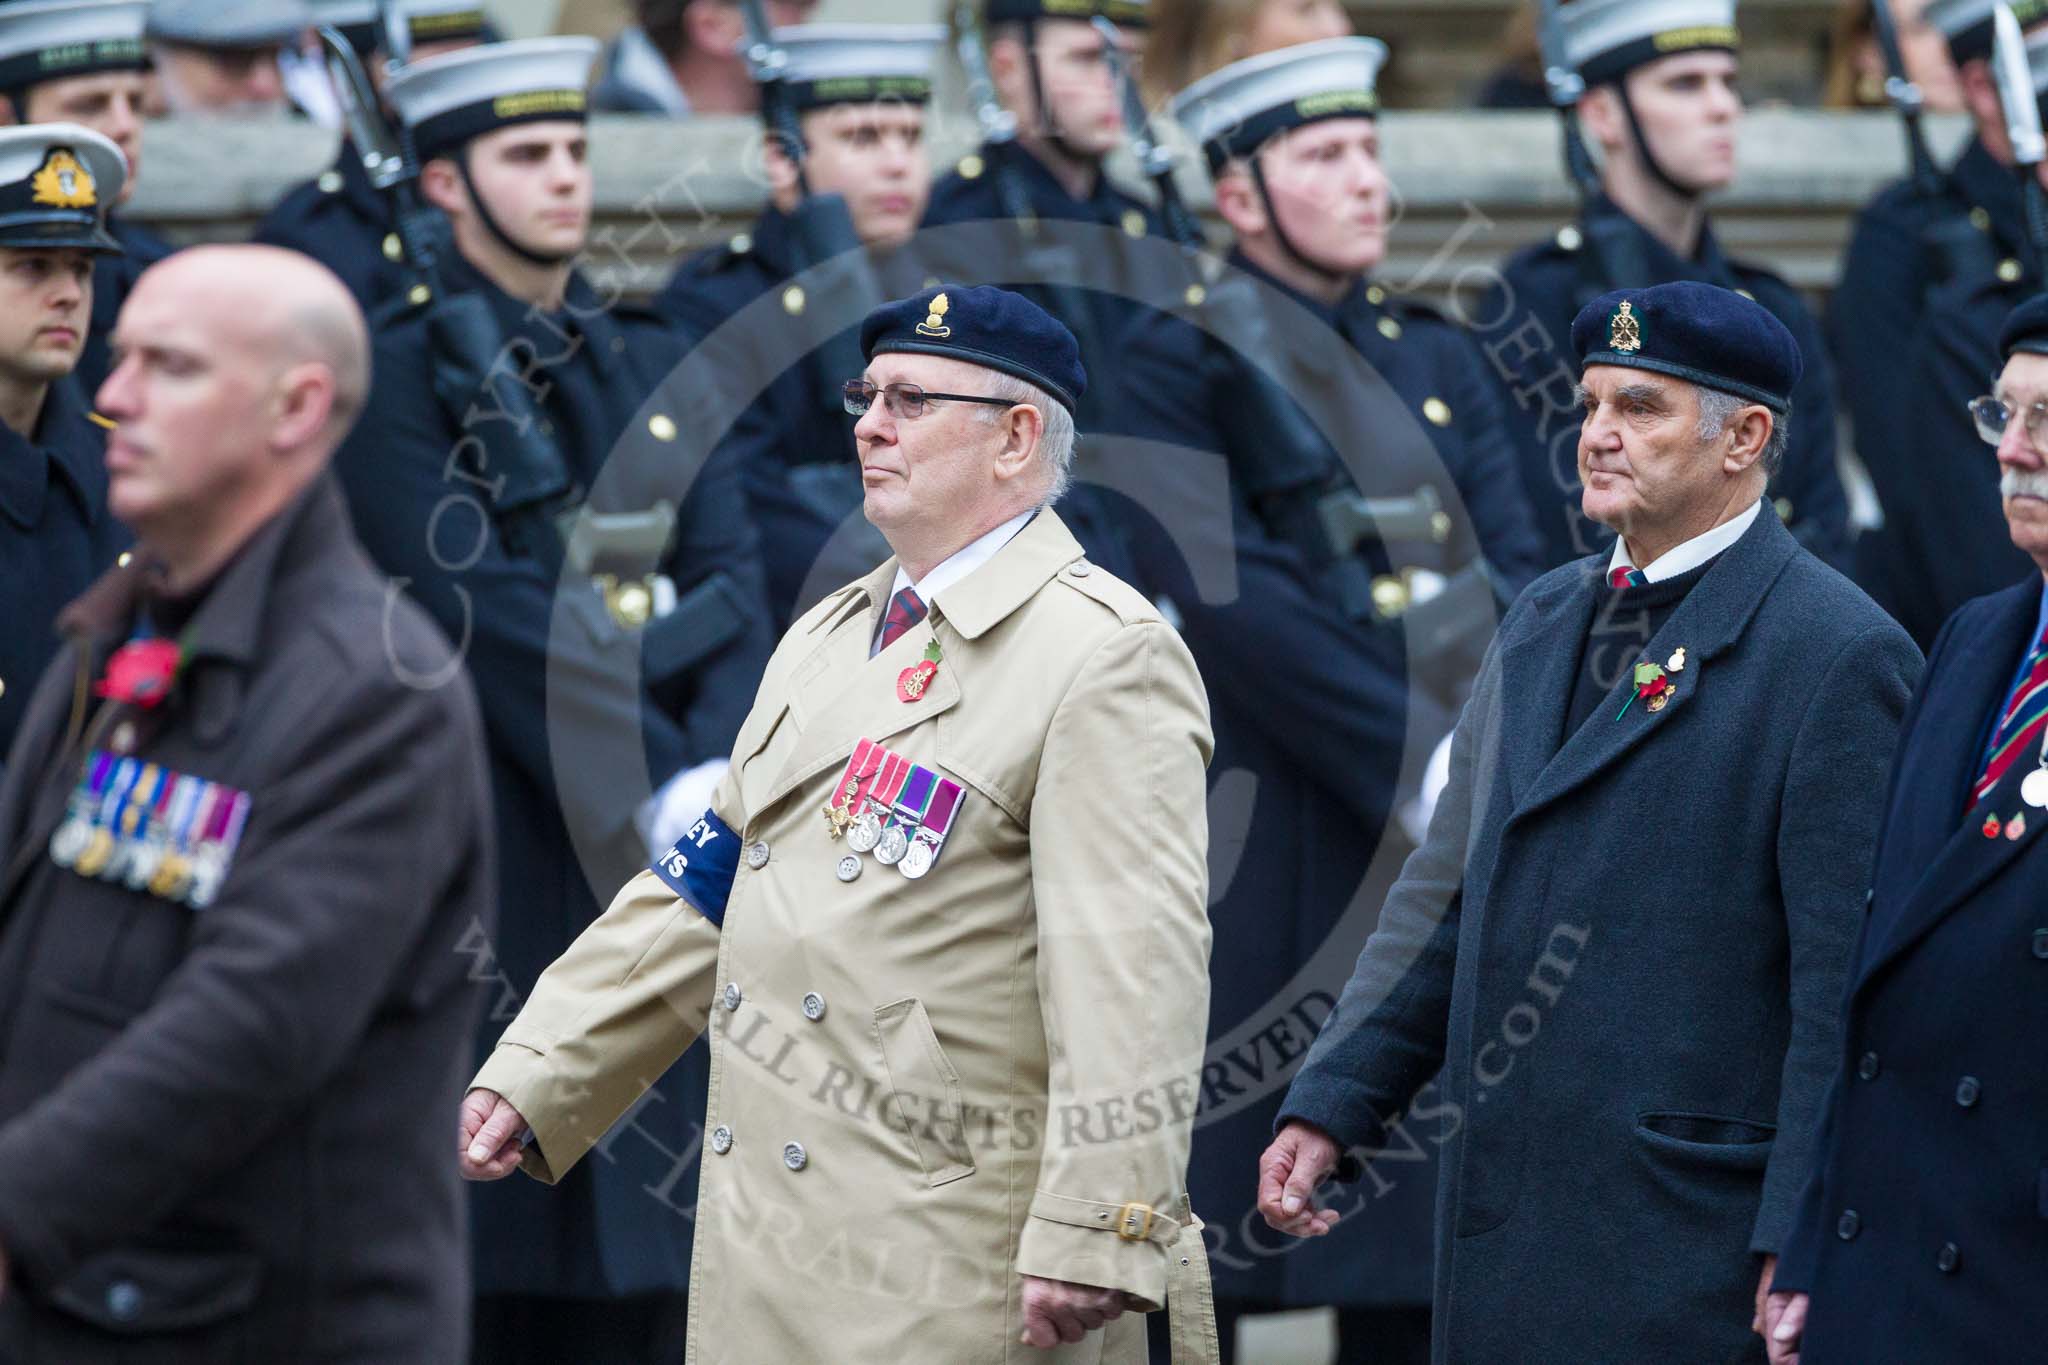 Remembrance Sunday at the Cenotaph 2015: Group B31, Beachley Old Boys Association.
Cenotaph, Whitehall, London SW1,
London,
Greater London,
United Kingdom,
on 08 November 2015 at 11:42, image #238